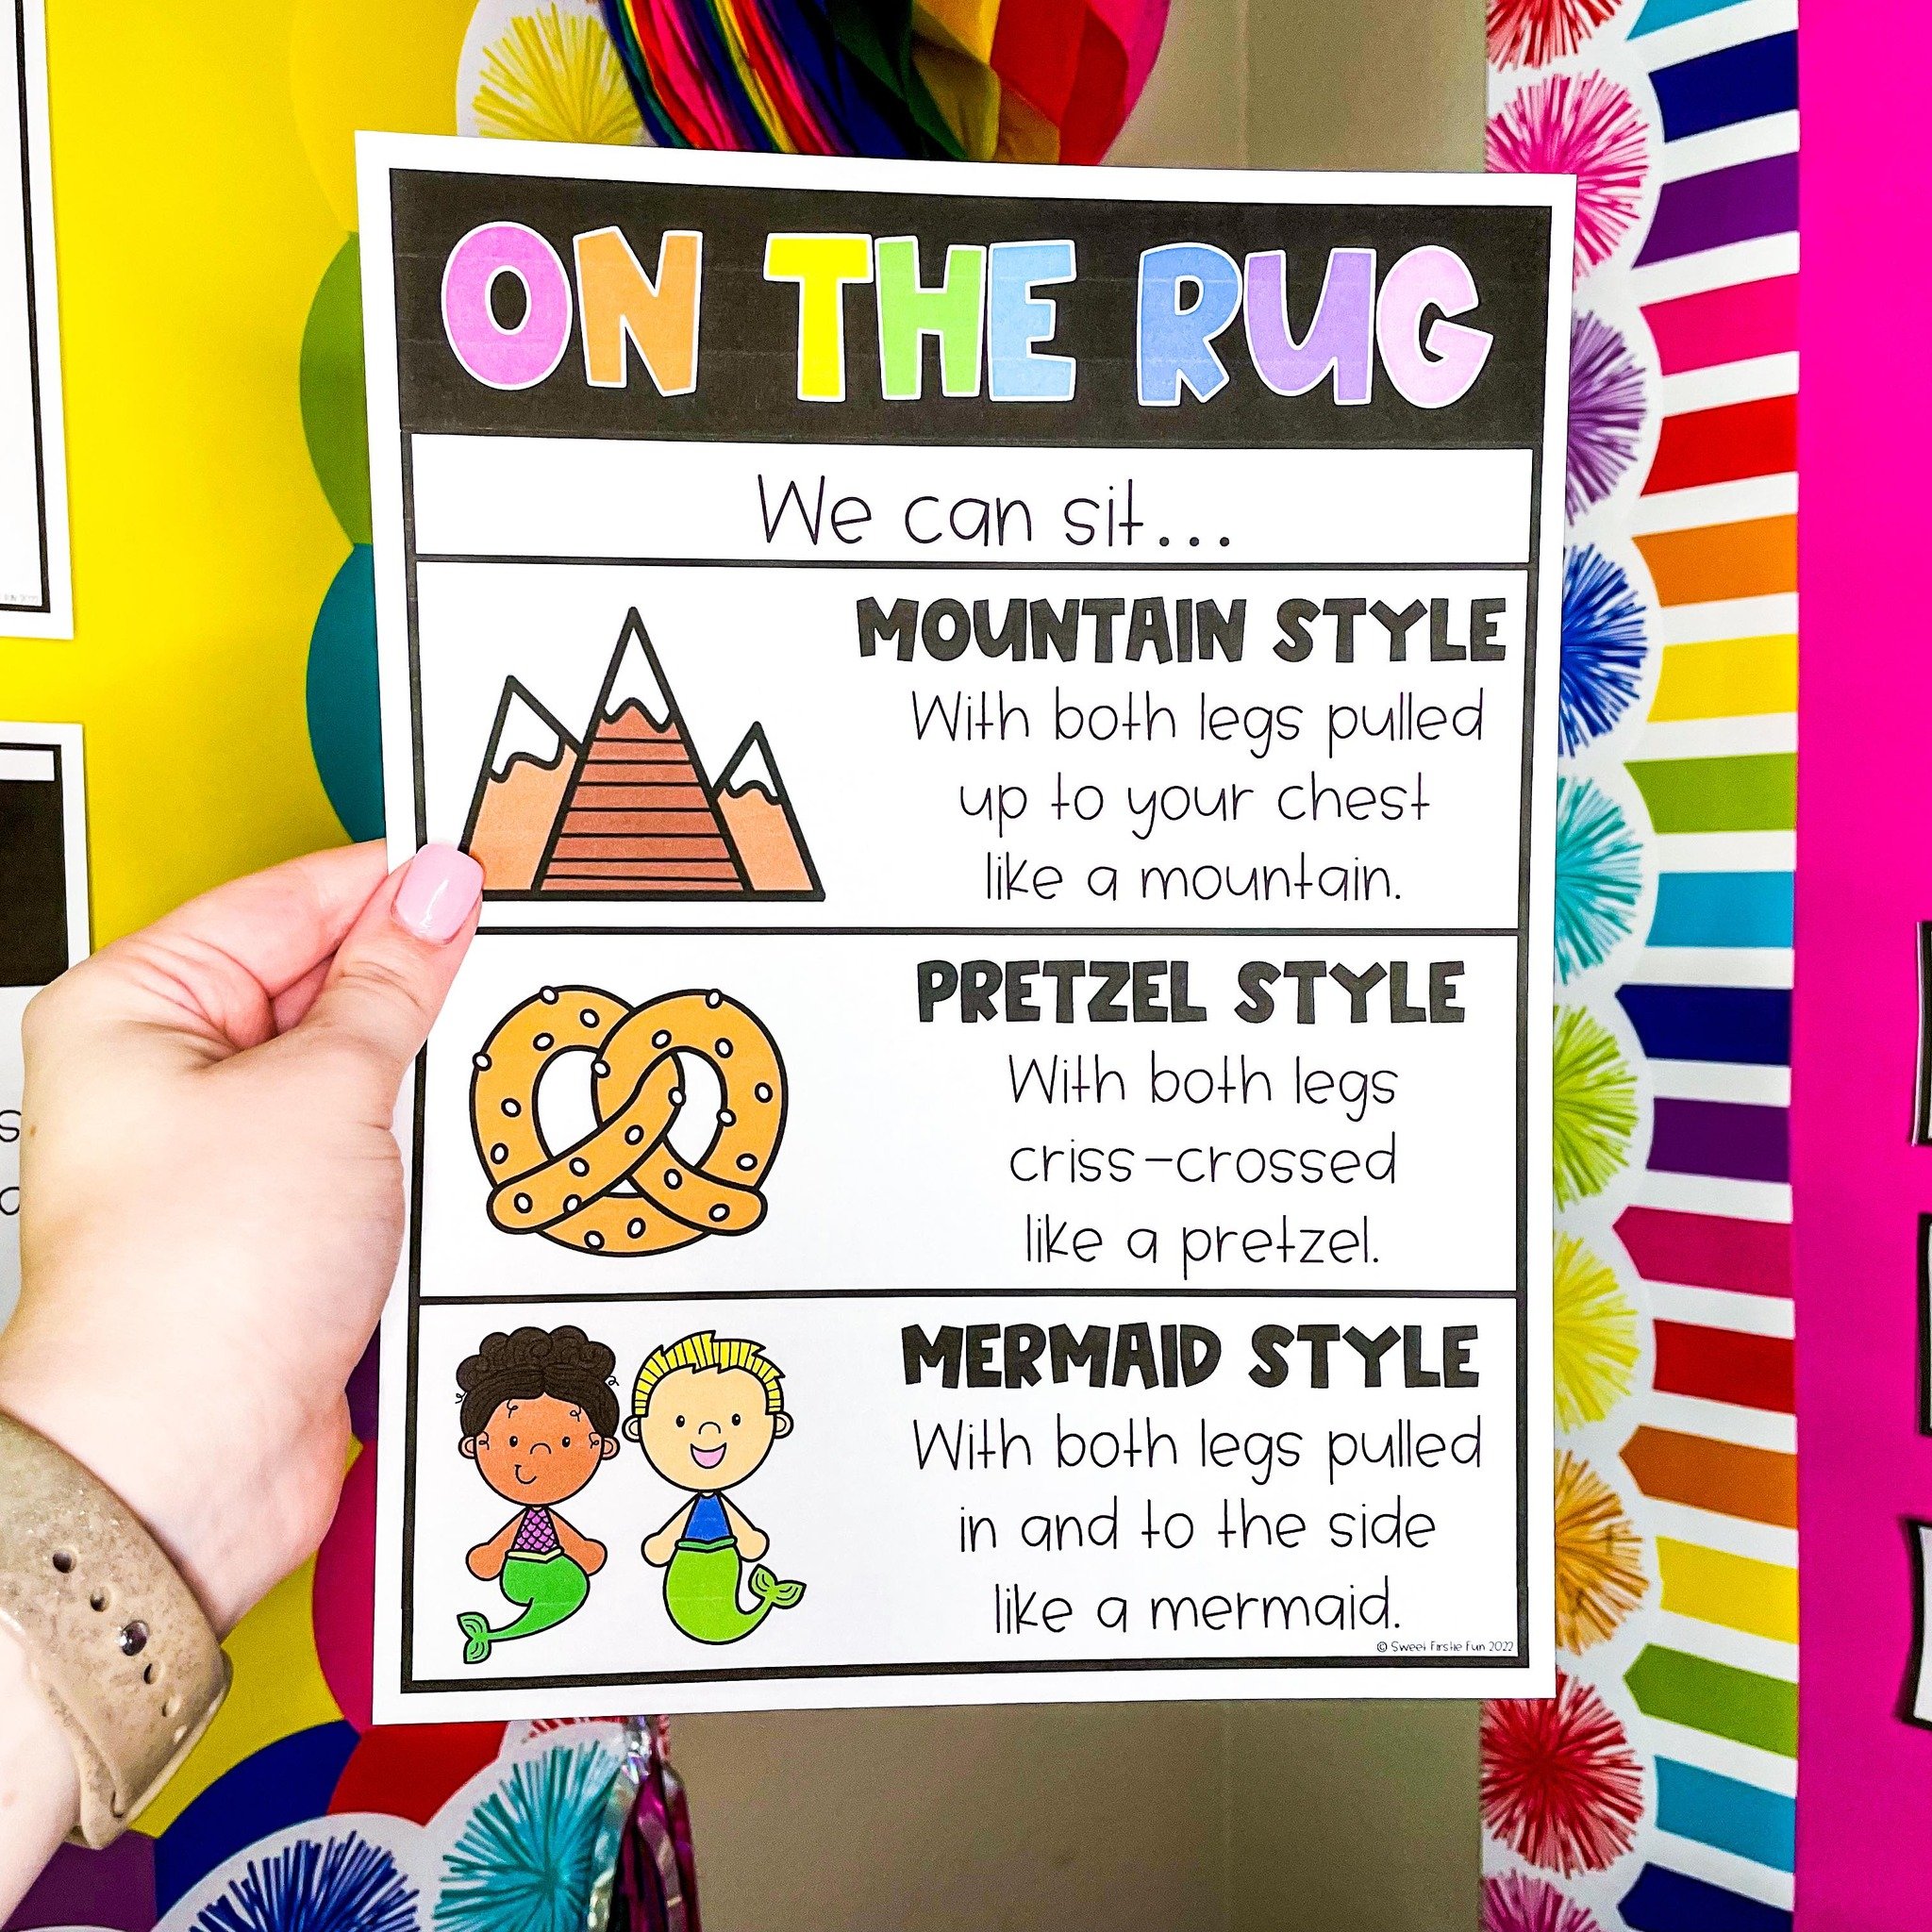 It&rsquo;s never a bad time to review rug expectations&hellip; especially at the end of the year when we&rsquo;re all just hanging on by a thread 😅😂 

I like giving my littles the reminder that they don&rsquo;t have to sit &ldquo;cross cross apples